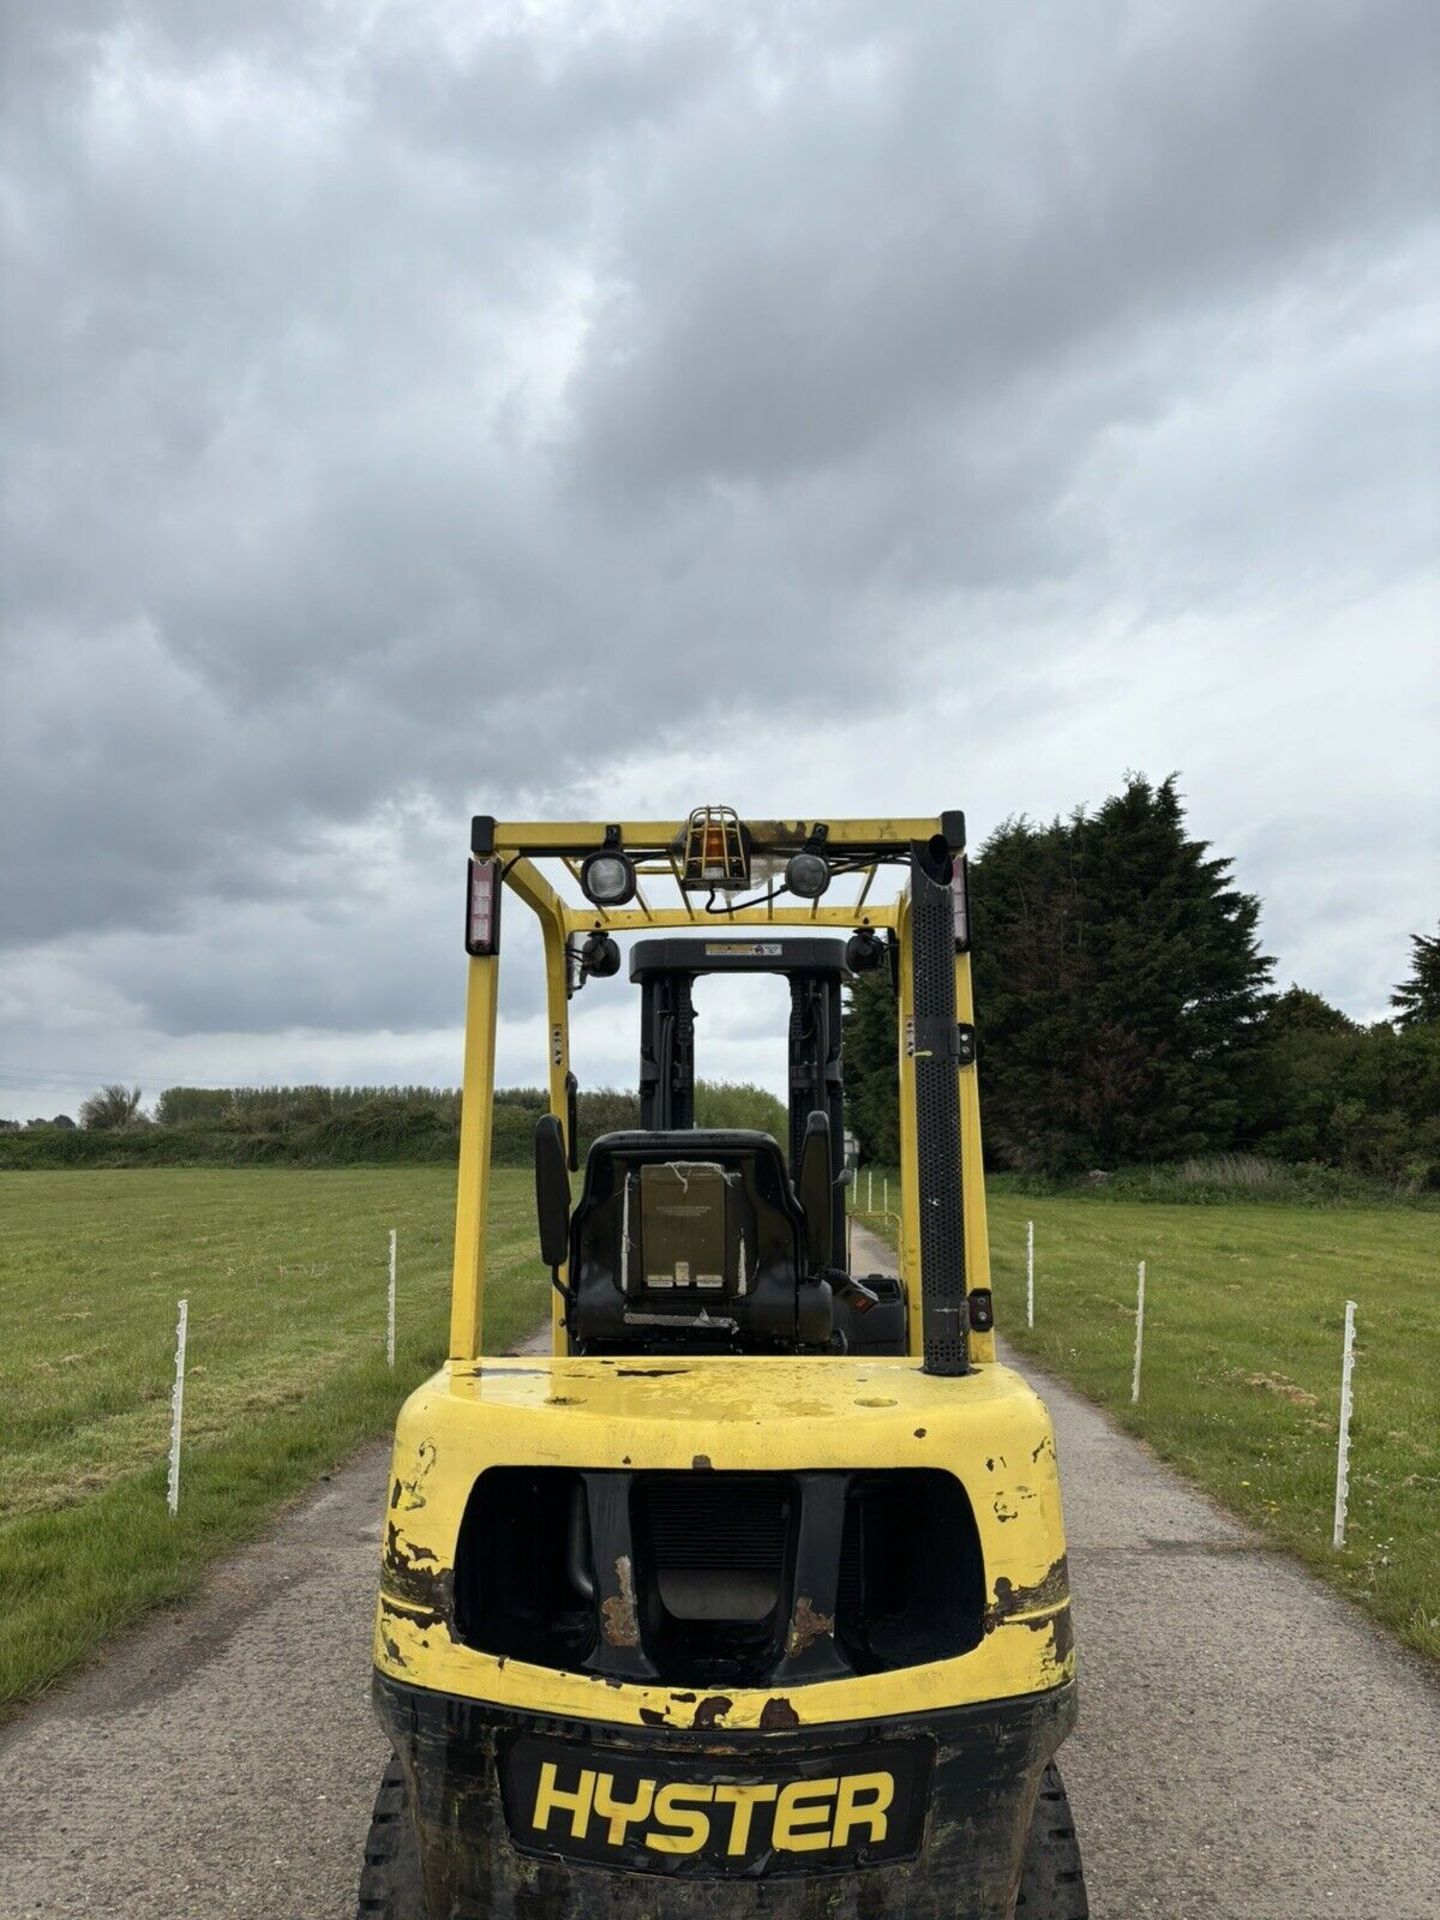 2018, HYSTER - Forklift Truck - Image 5 of 6